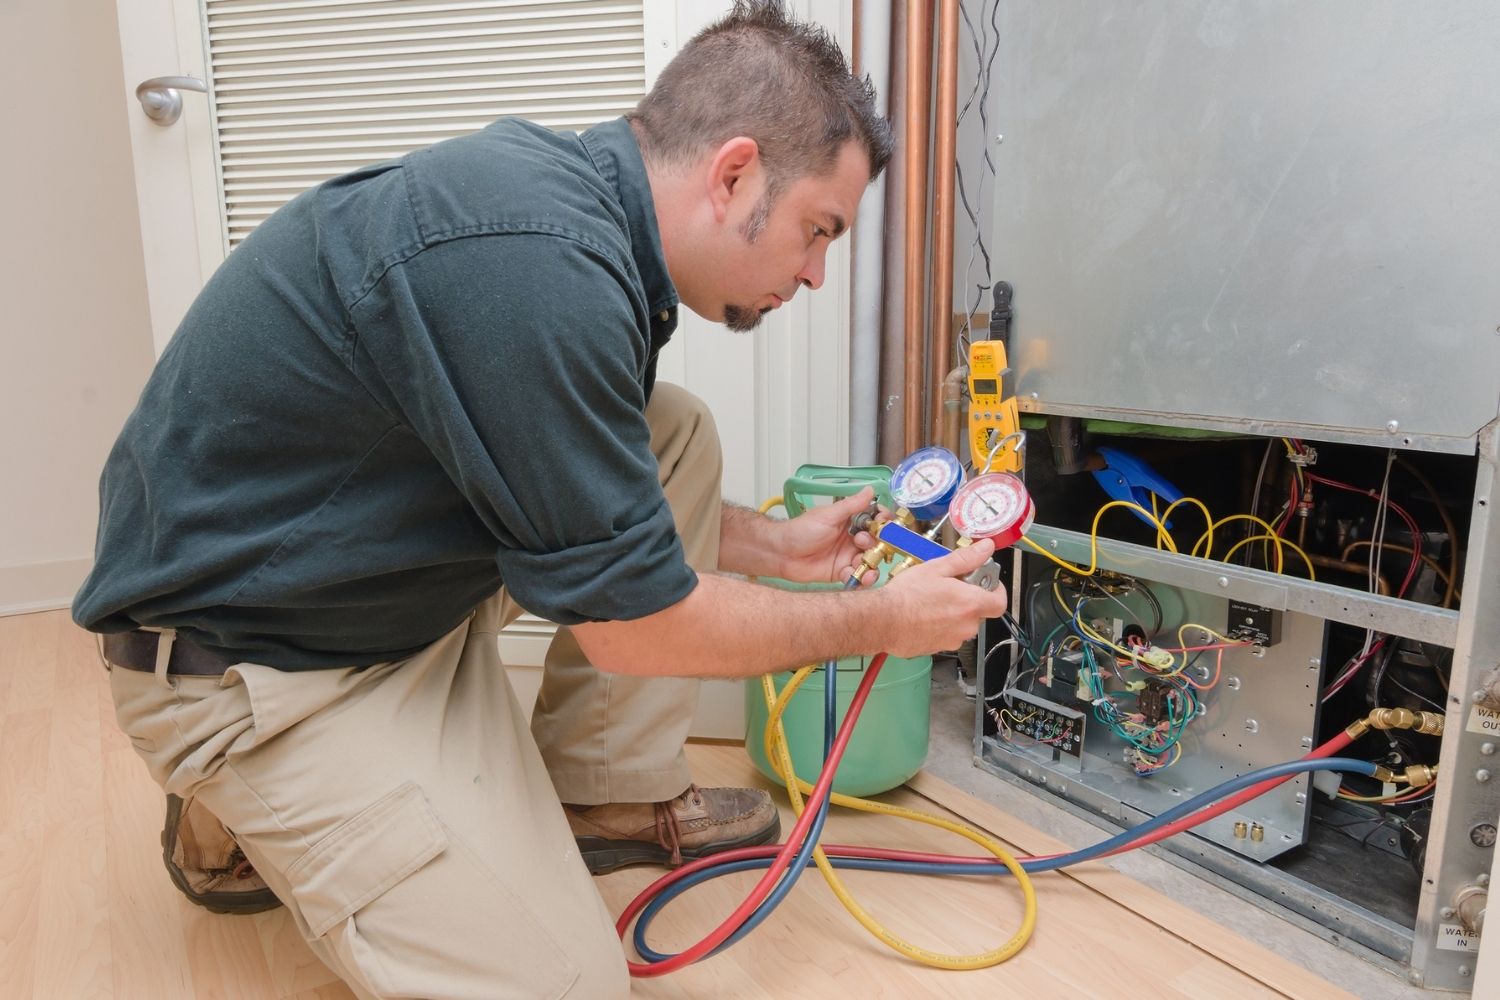 A worker uses a tool to test the functioning of an HVAC unit.